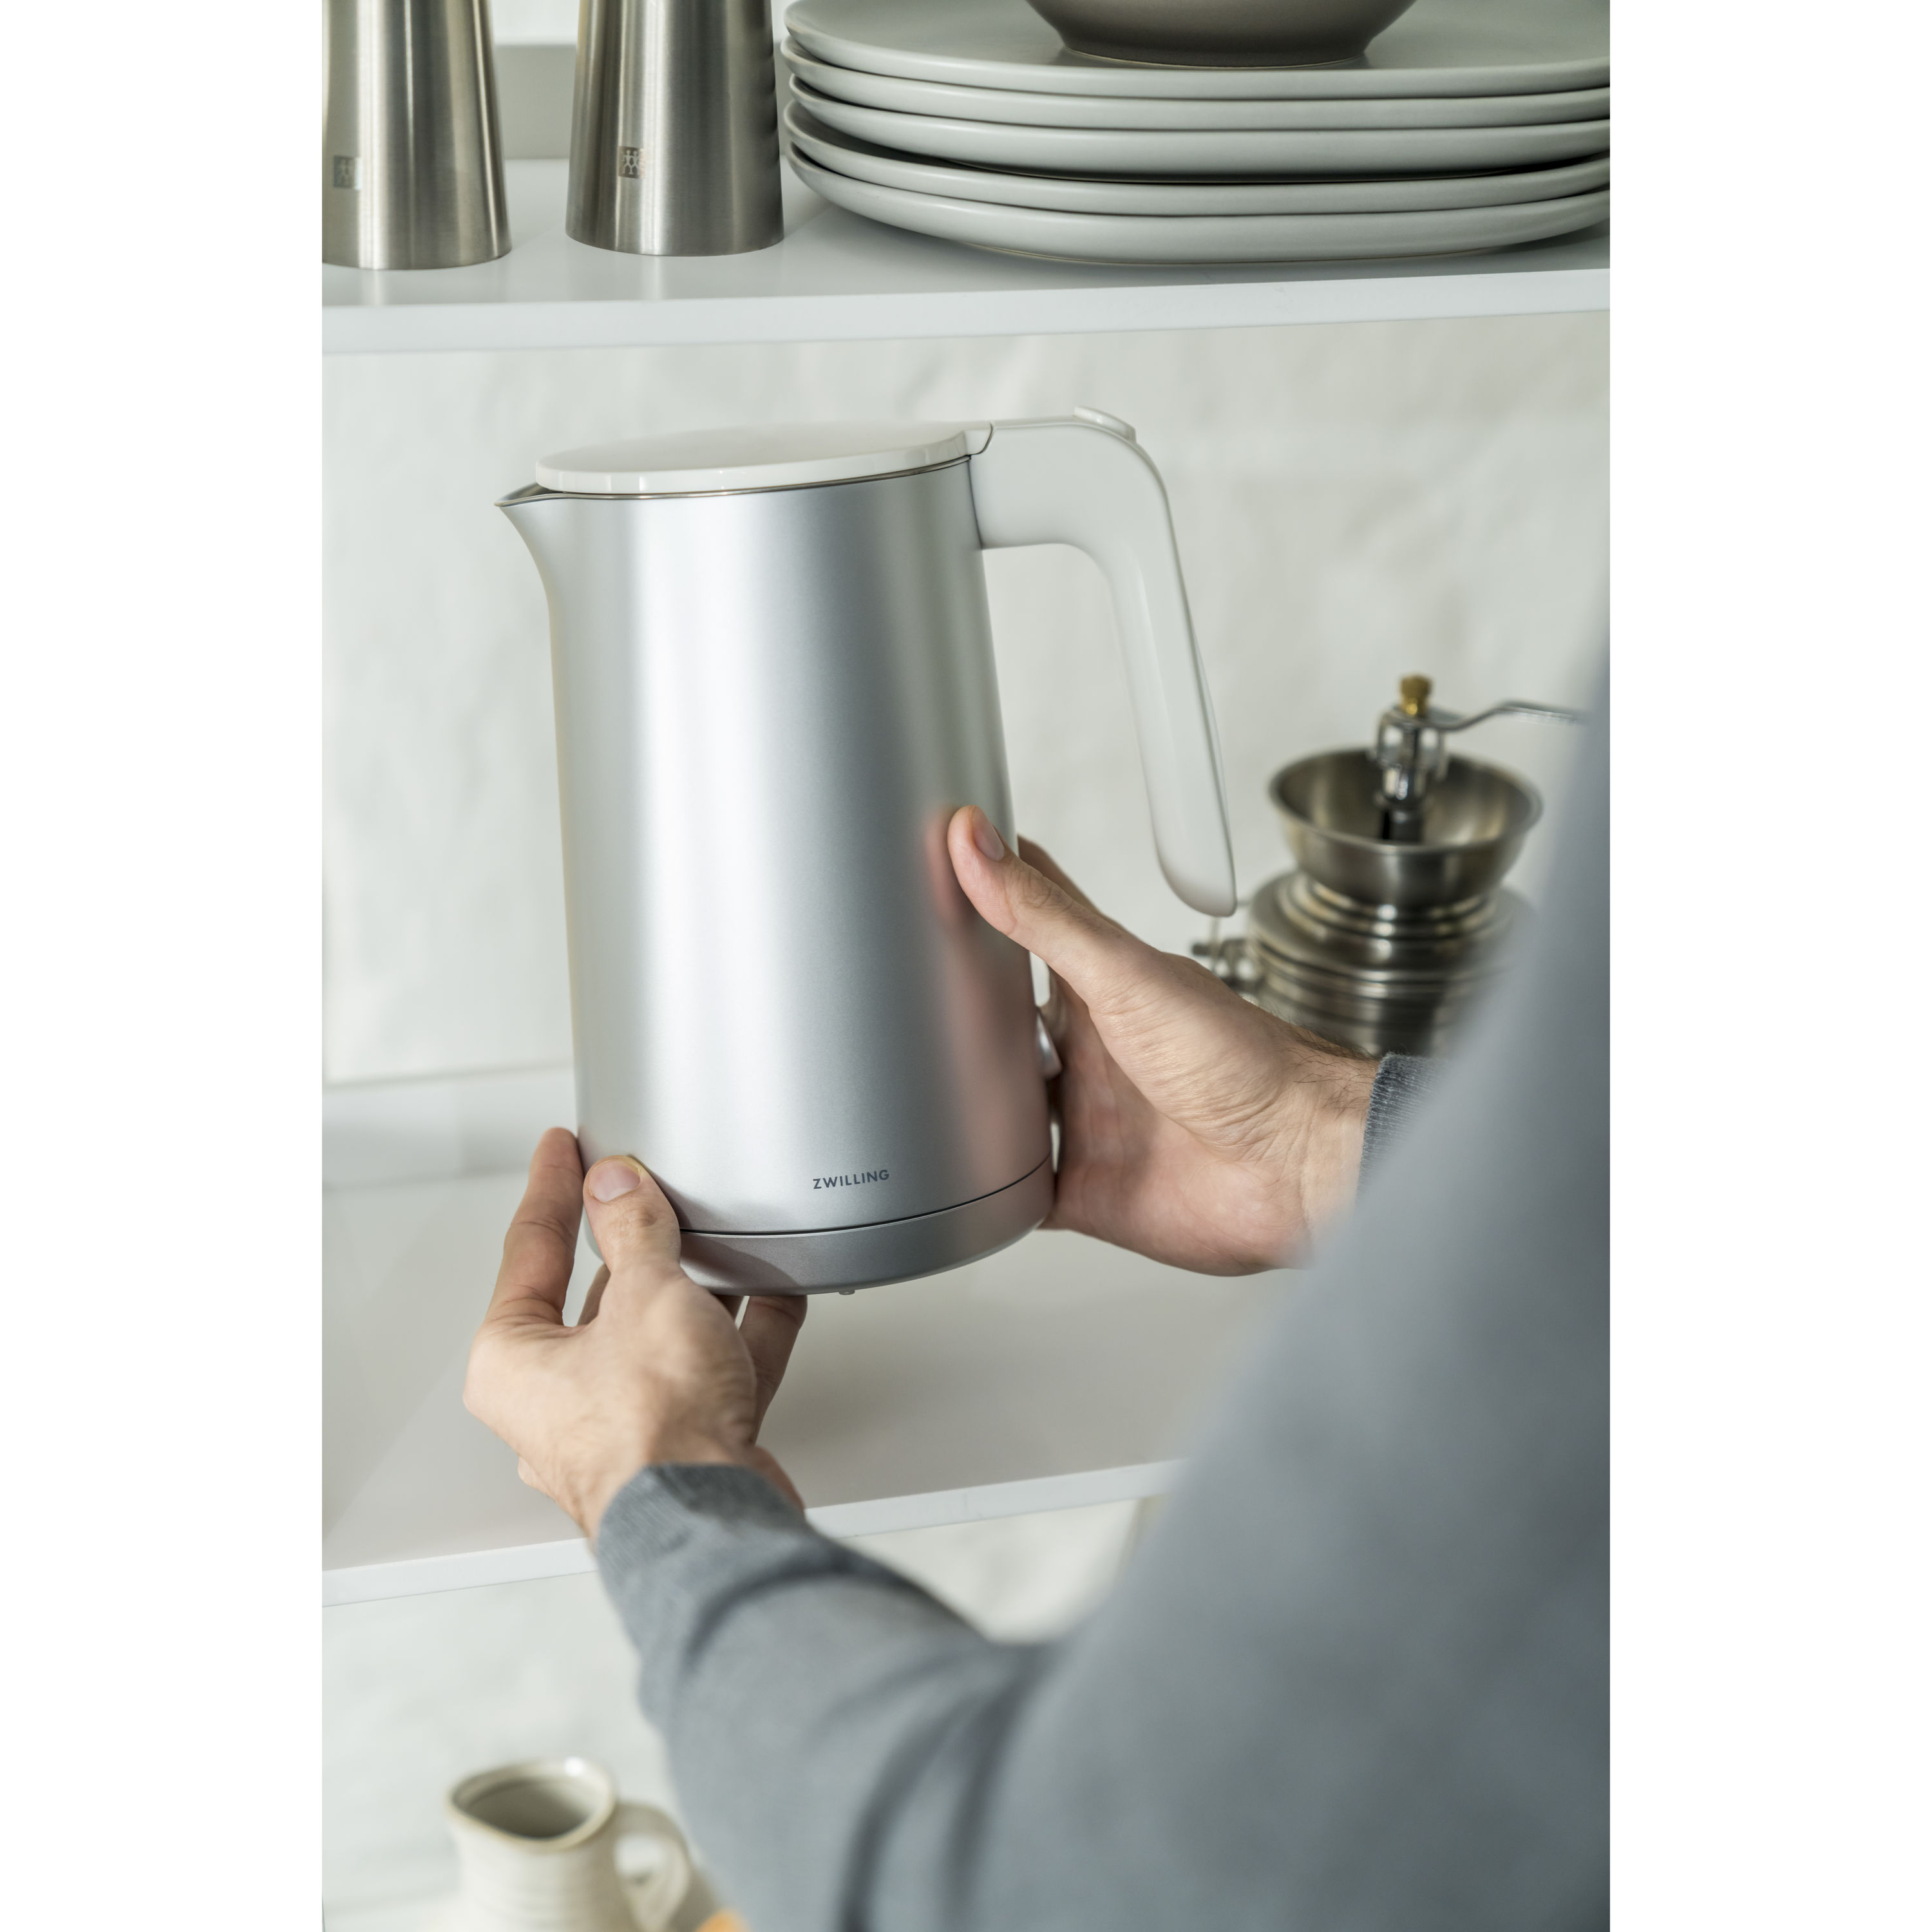 ZWILLING Enfinigy Cool Touch 1.5-Liter Electric Kettle Pro, Cordless Tea  Kettle & Hot Water, Silver